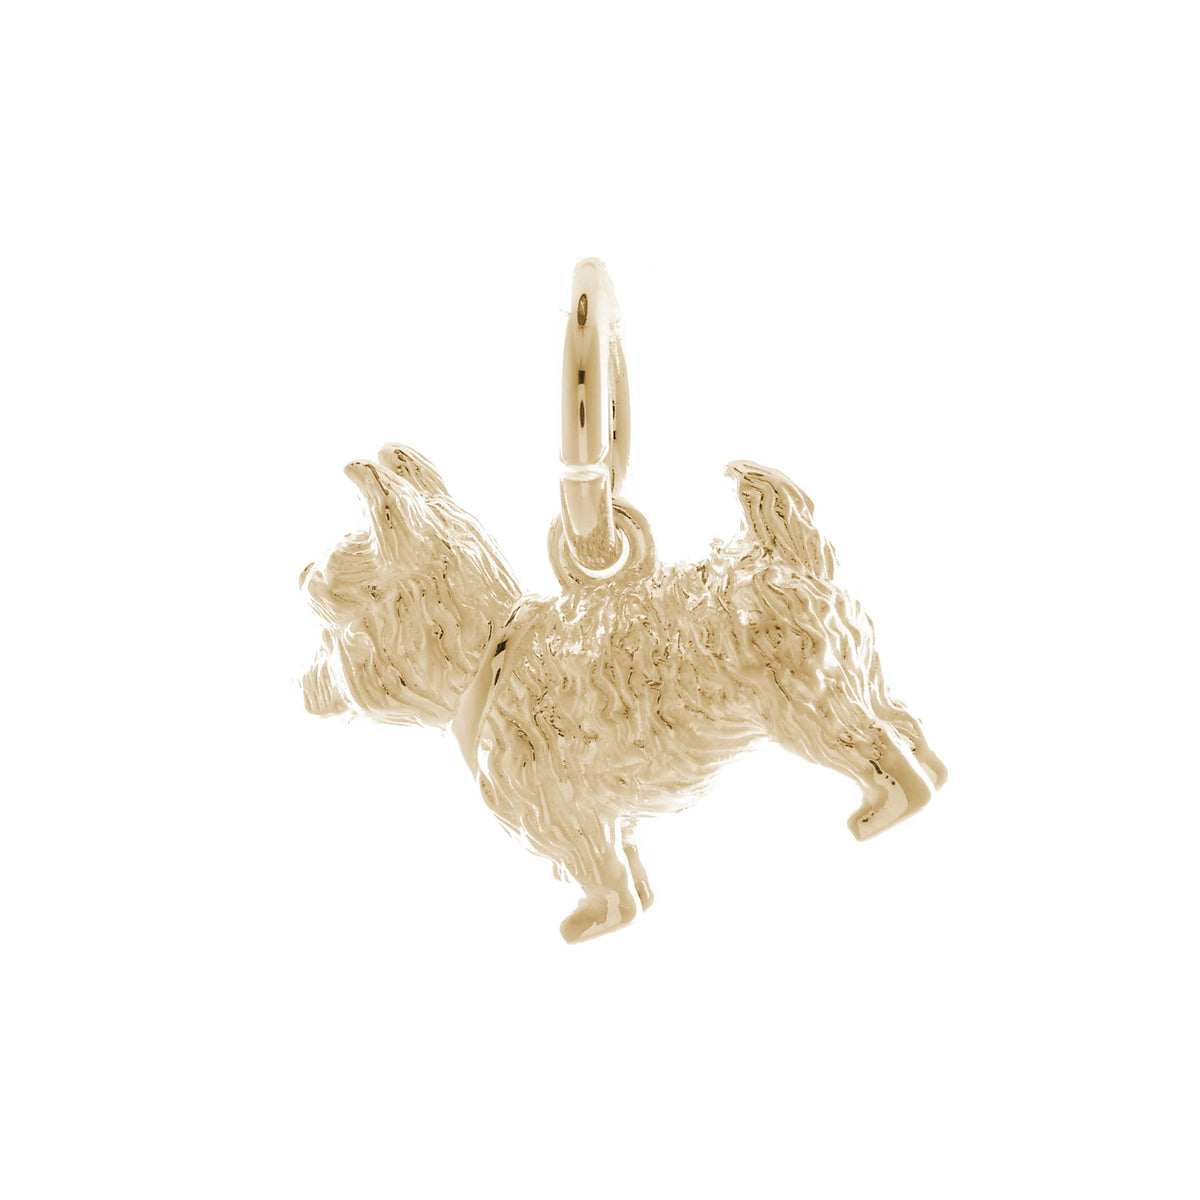 Solid 9ct gold Westie charm with tiny bandana (optional), perfect for a charm bracelet or necklace.